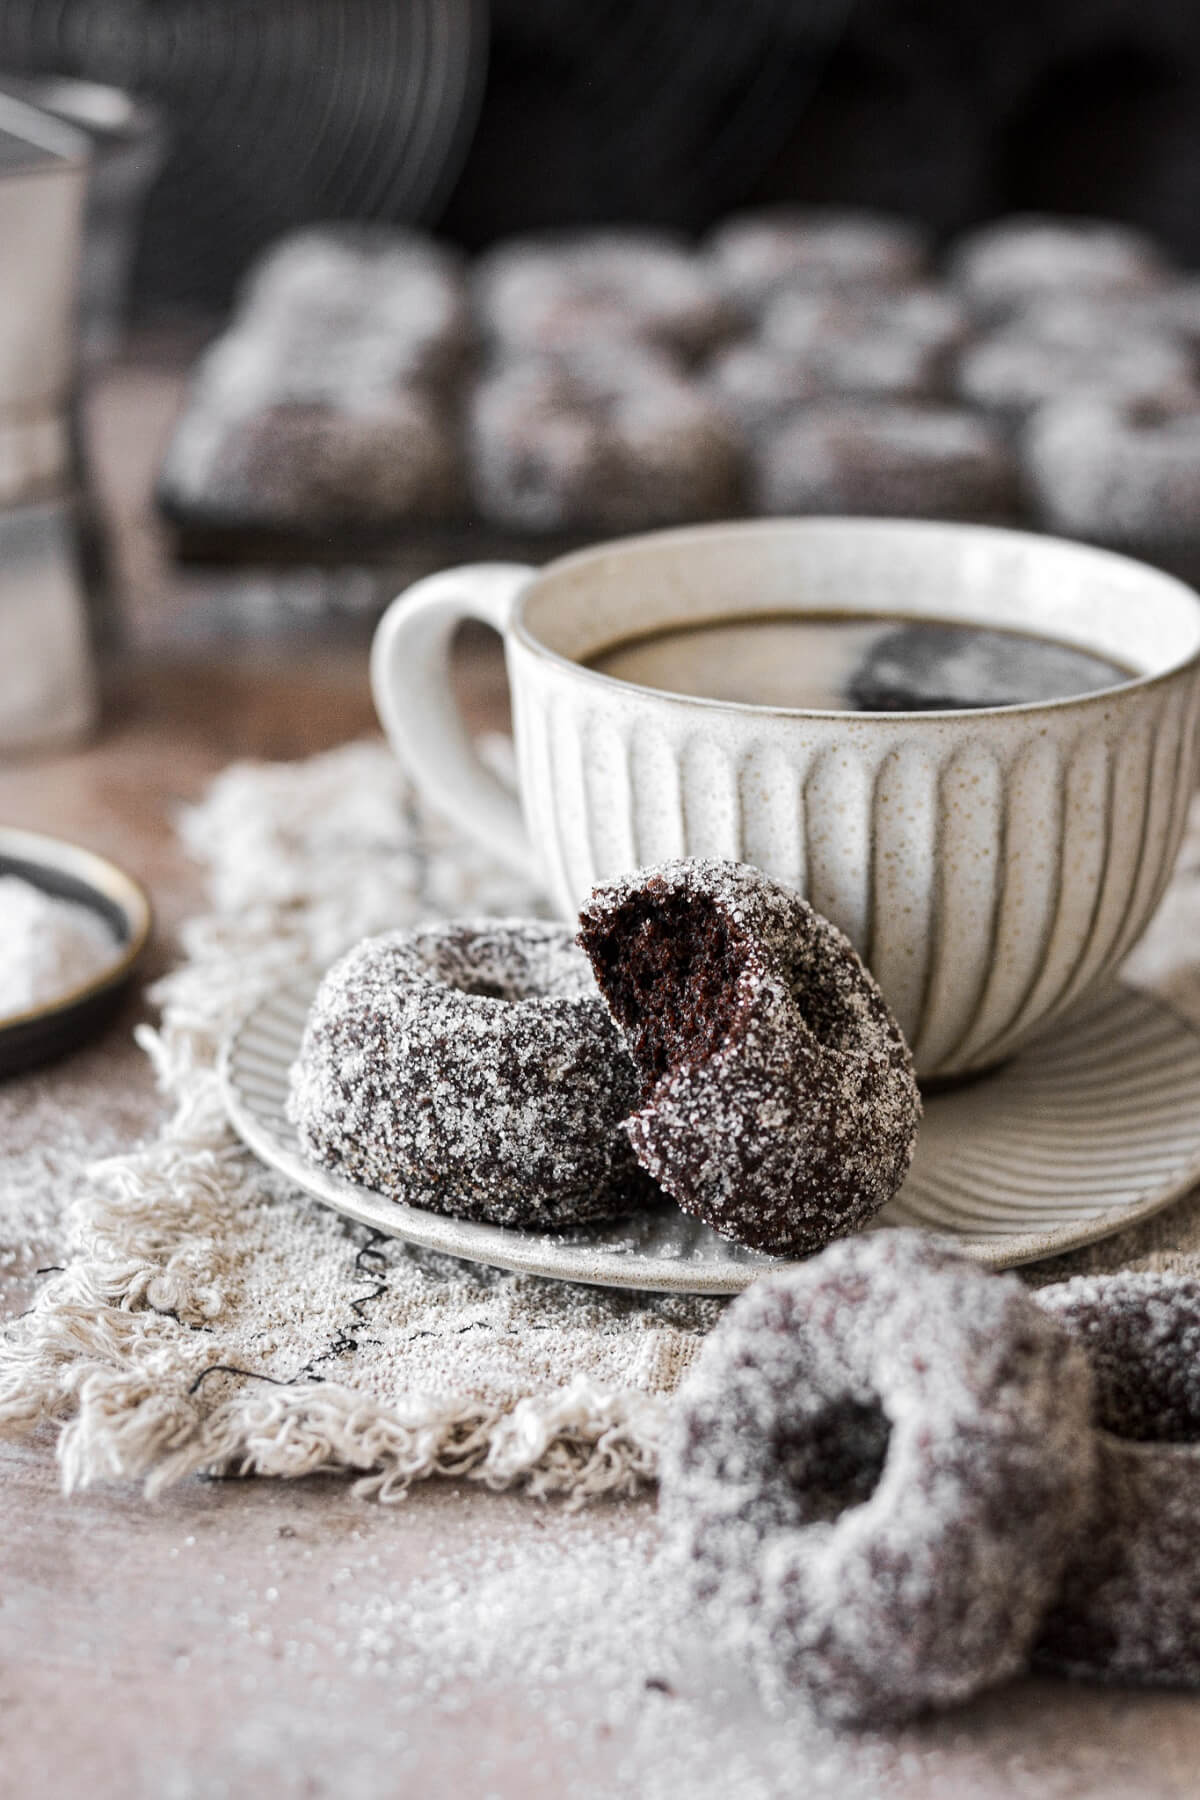 Sugar coated chocolate doughnuts with a cup of coffee.